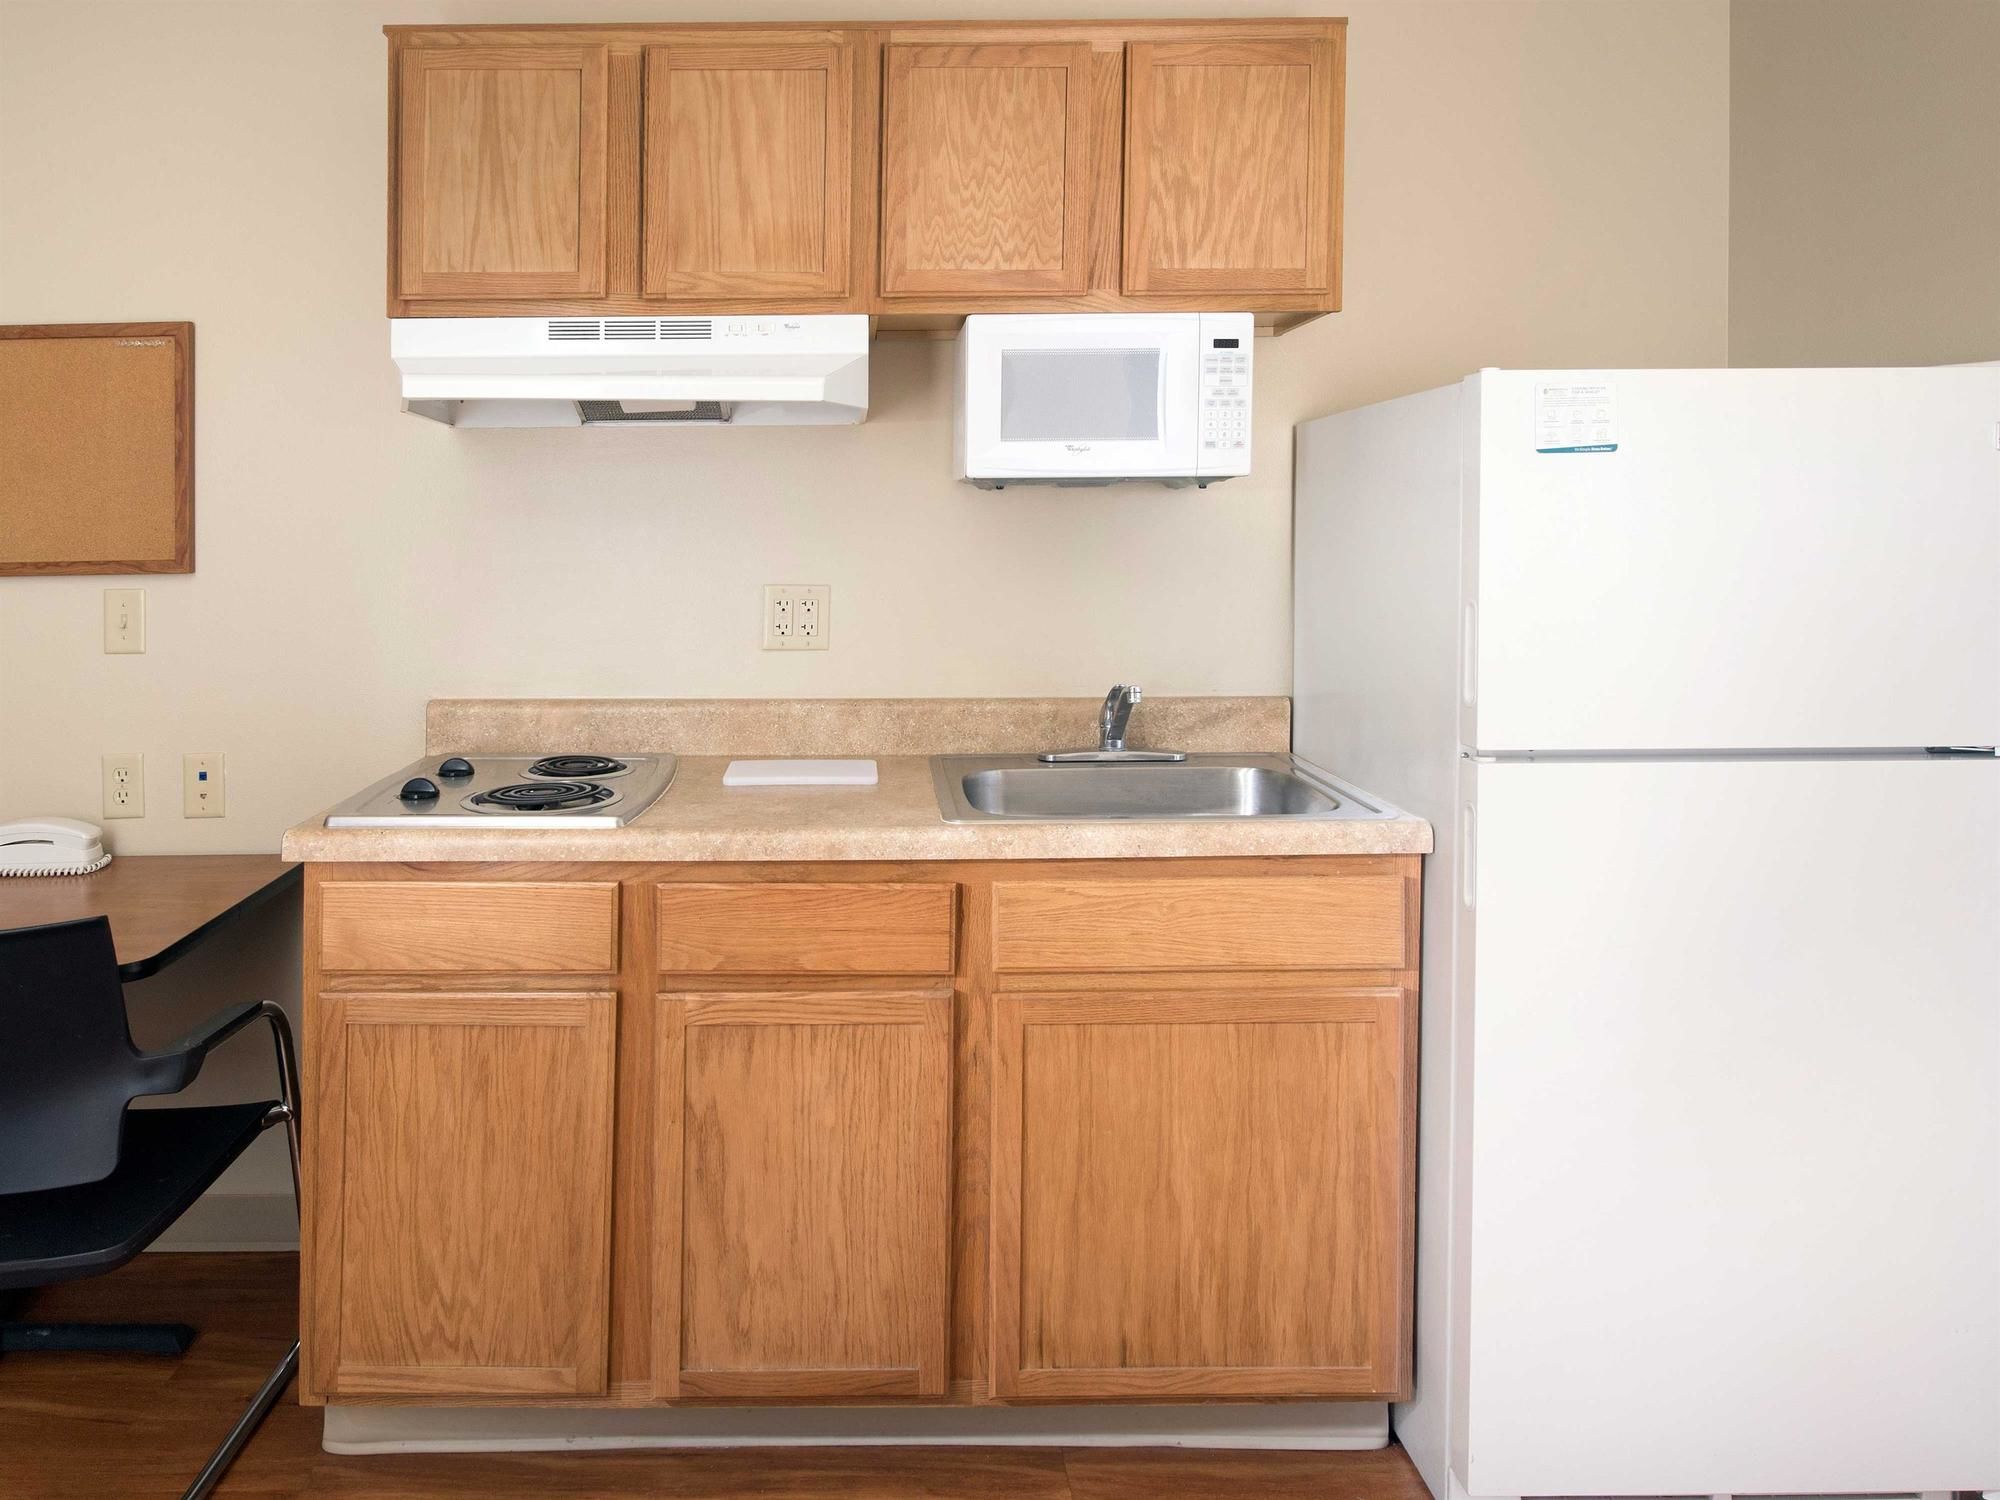 Extended Stay America Select Suites Provo American Fork